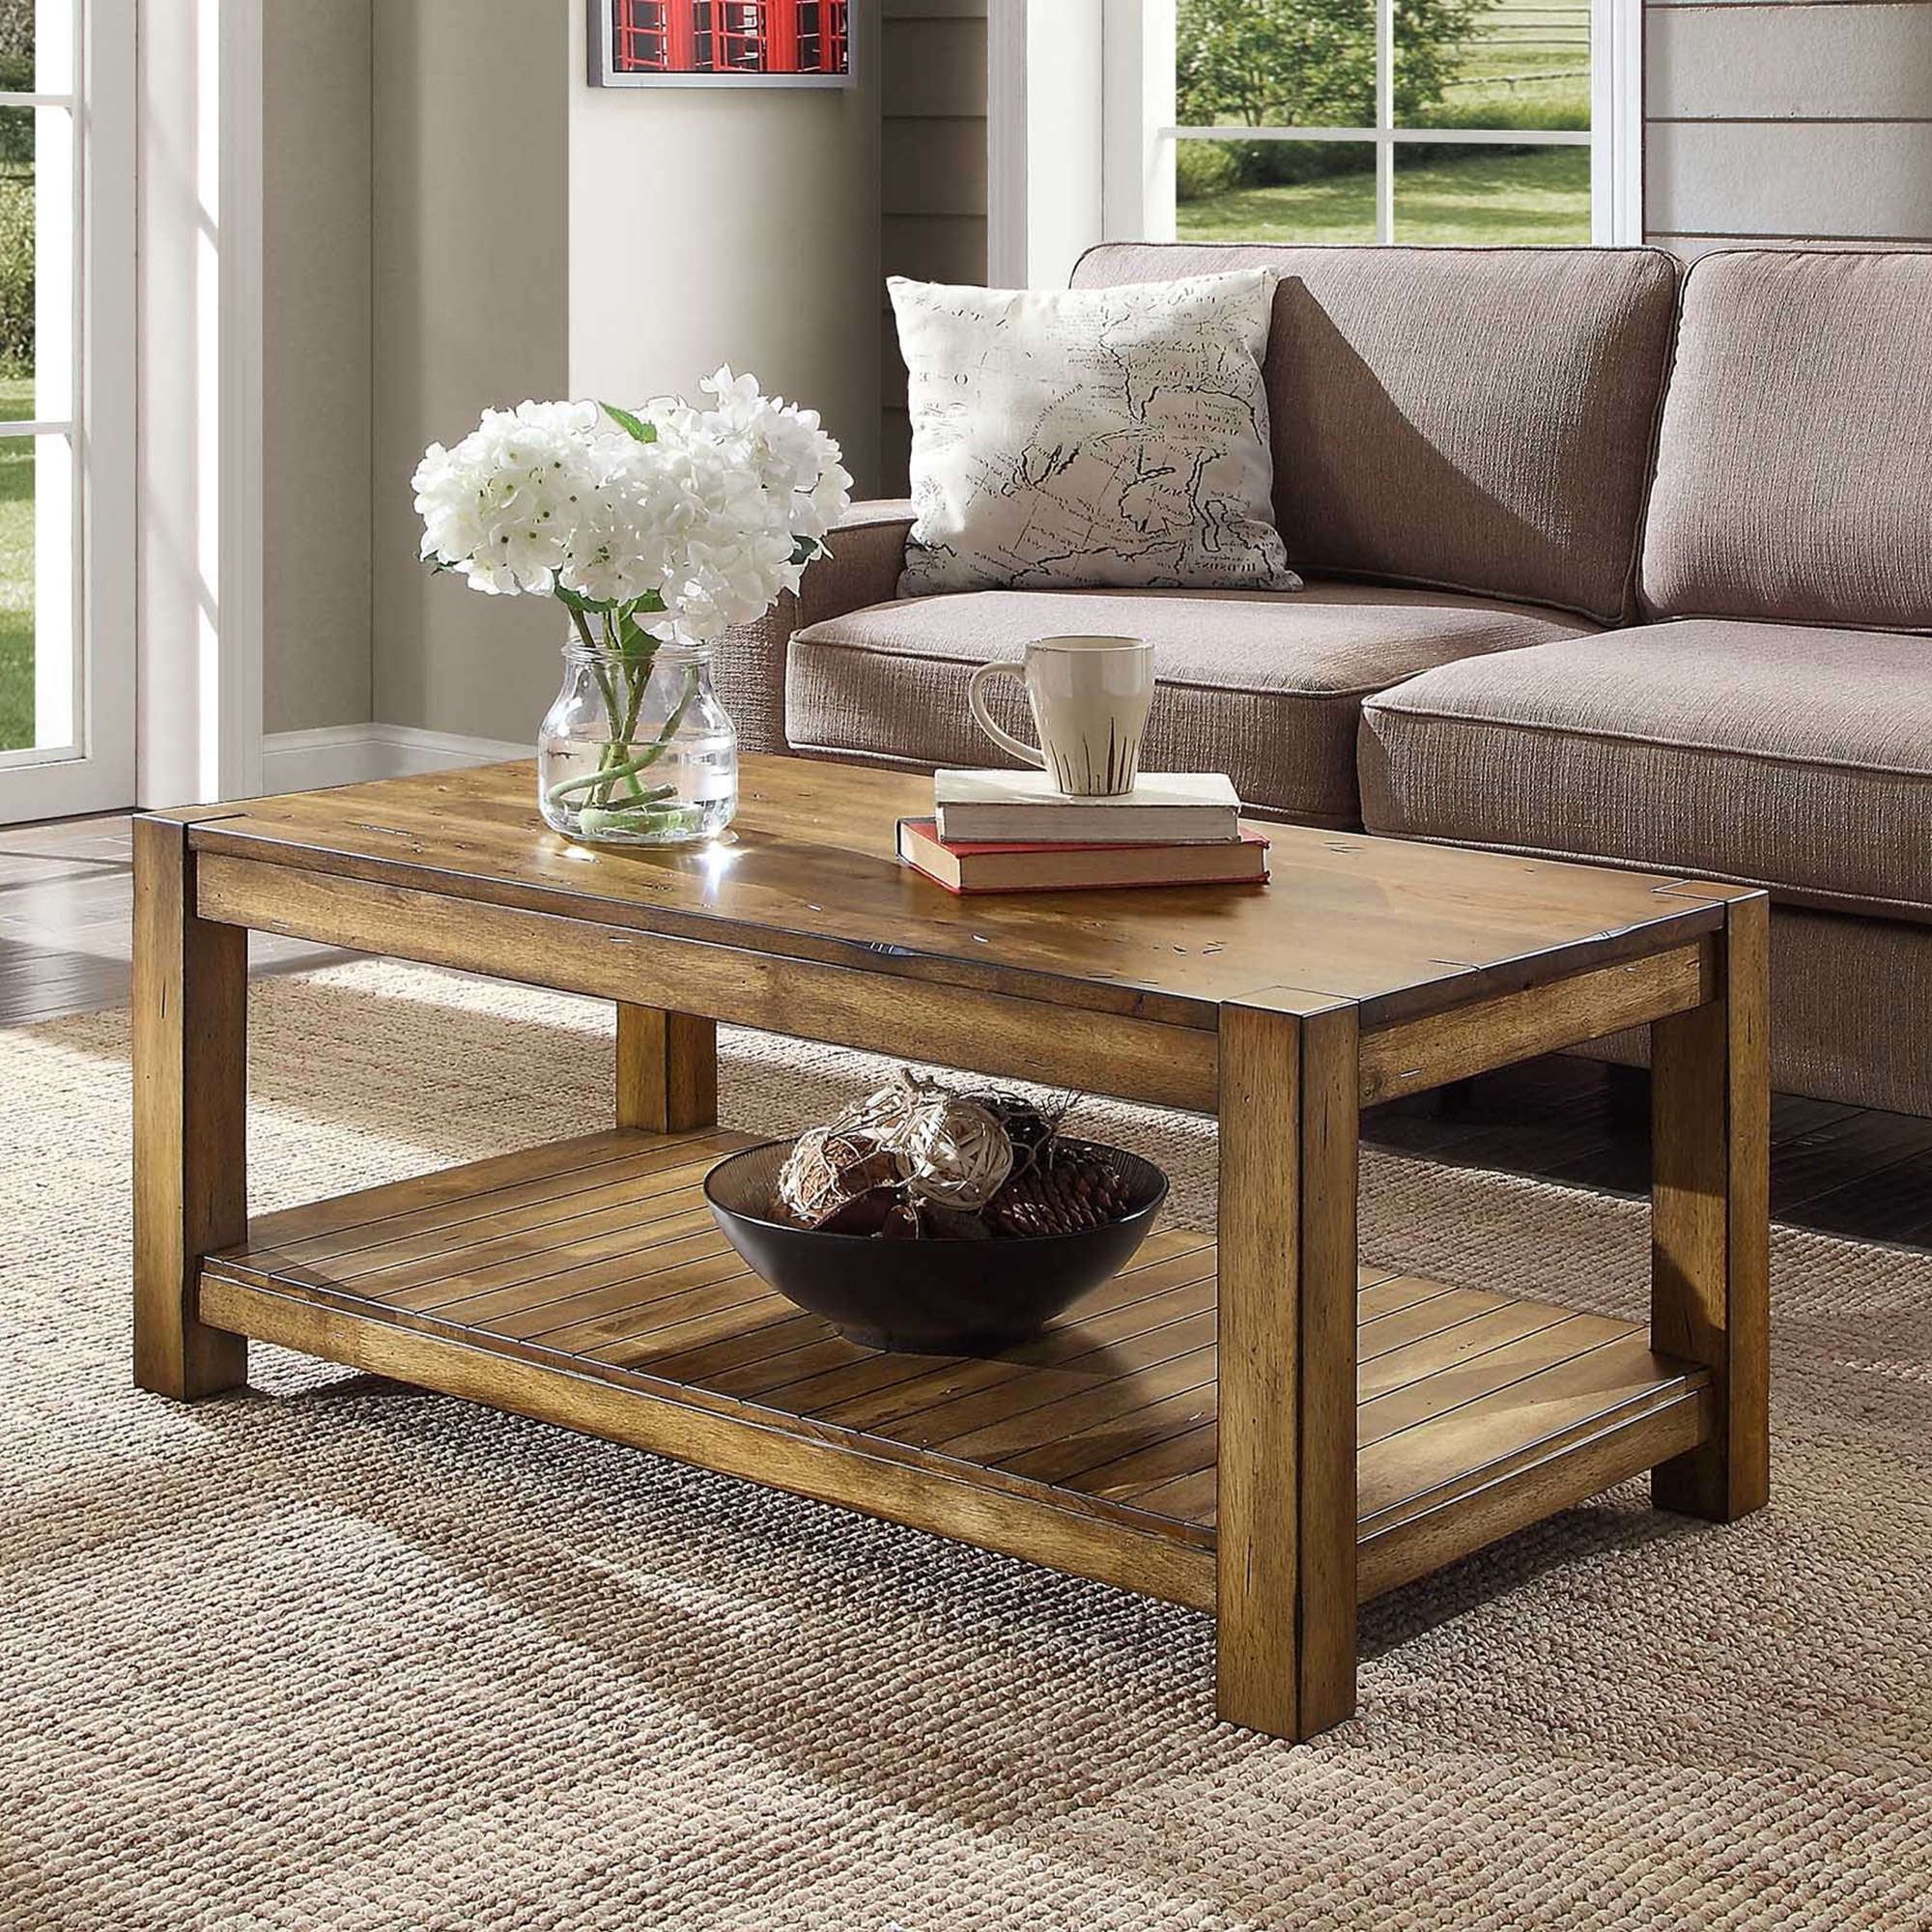 Most Popular Rustic Wood Coffee Tables Within Bryant Solid Wood Coffee Table, Rustic Maple Brown Finish – Walmart (View 5 of 15)